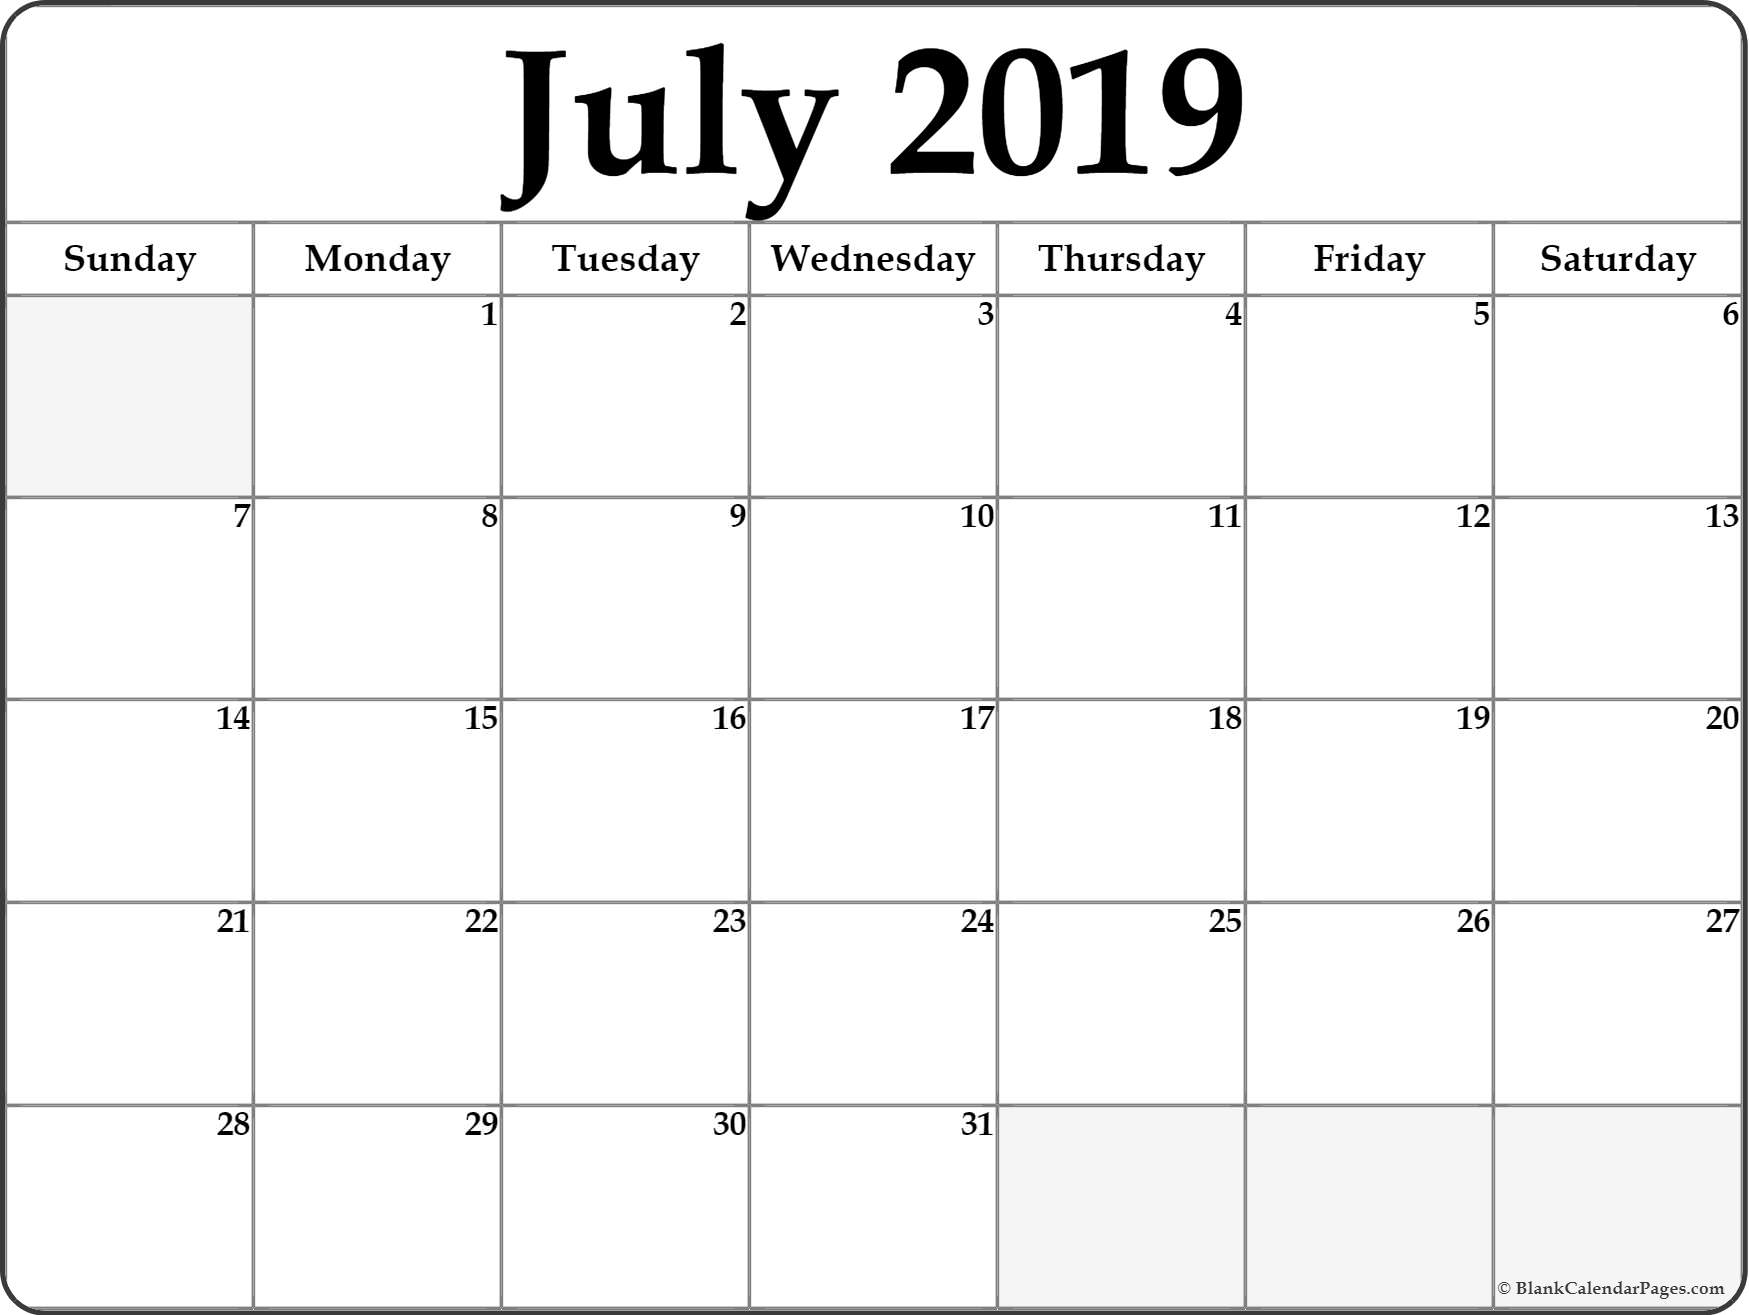 July 2019 Calendar | Free Printable Monthly Calendars with Free At A Glance Editable Calendar July 2019-June 2020